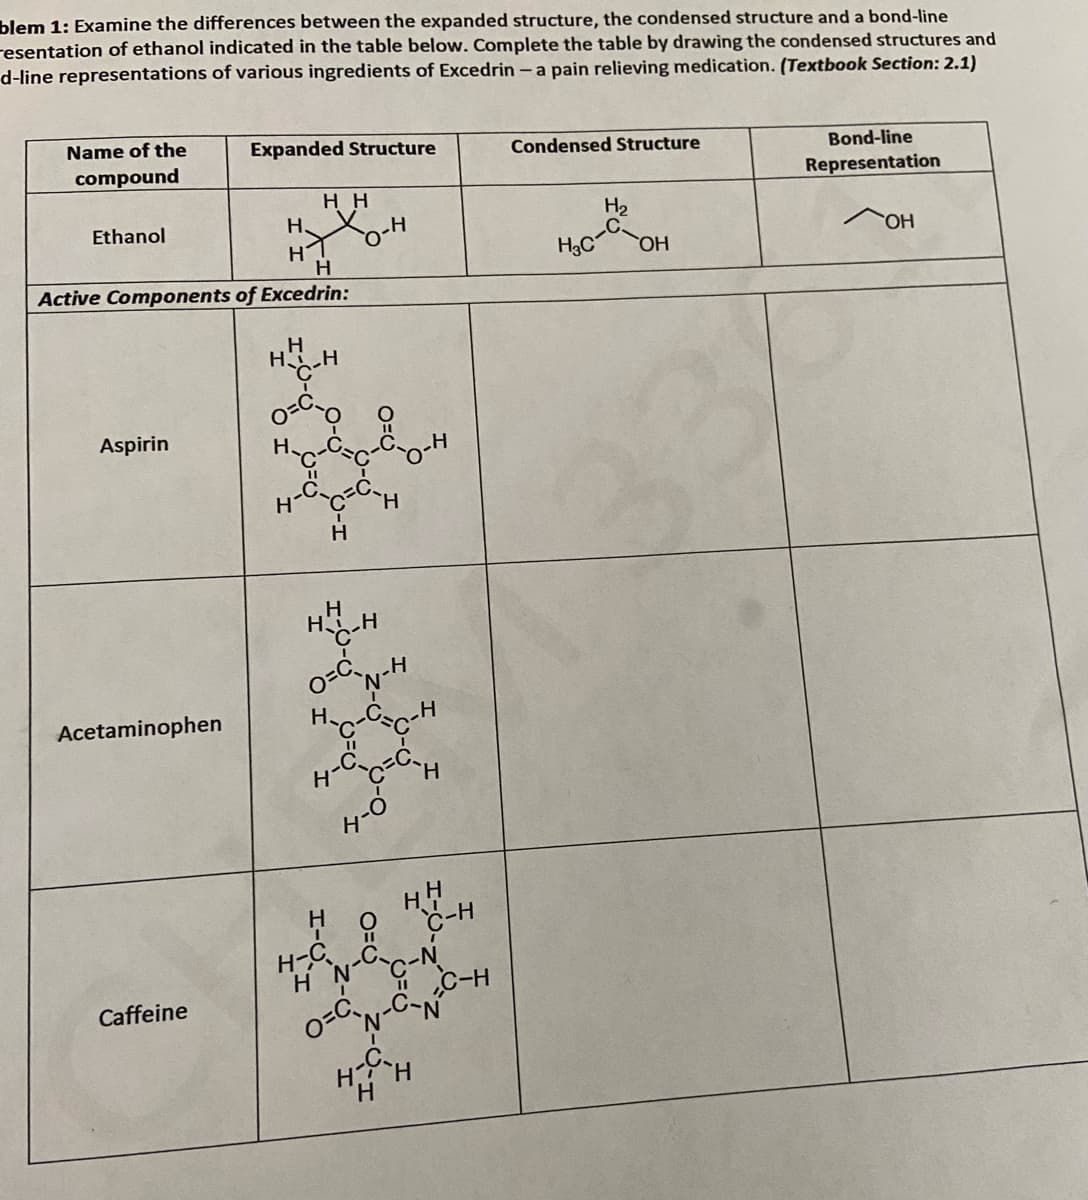 blem 1: Examine the differences between the expanded structure, the condensed structure and a bond-line
resentation of ethanol indicated in the table below. Complete the table by drawing the condensed structures and
d-line representations of various ingredients of Excedrin -a pain relieving medication. (Textbook Section: 2.1)
Name of the
Expanded Structure
Condensed Structure
Bond-line
compound
Representation
нн
Ethanol
H.
H2
HO.
H3C
HO,
H
Active Components of Excedrin:
HH
Aspirin
33
H.
Acetaminophen
H
1C-H
Caffeine
H
H.
